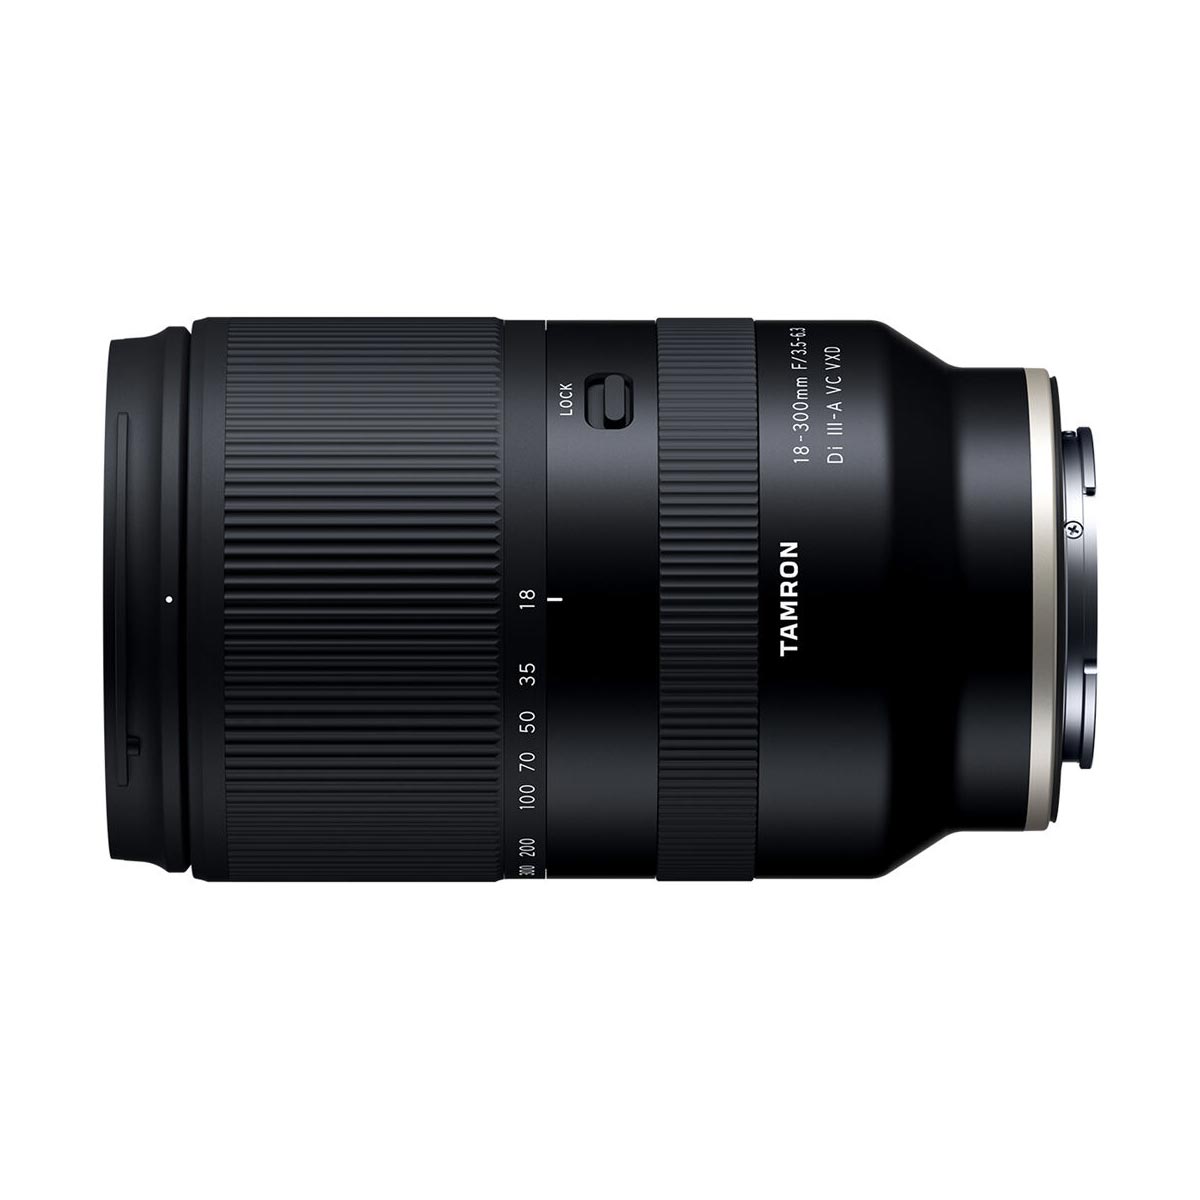 Tamron 18-300mm f/3.5-6.3 Di III-A VC VXD Lens for Sony E (APS-